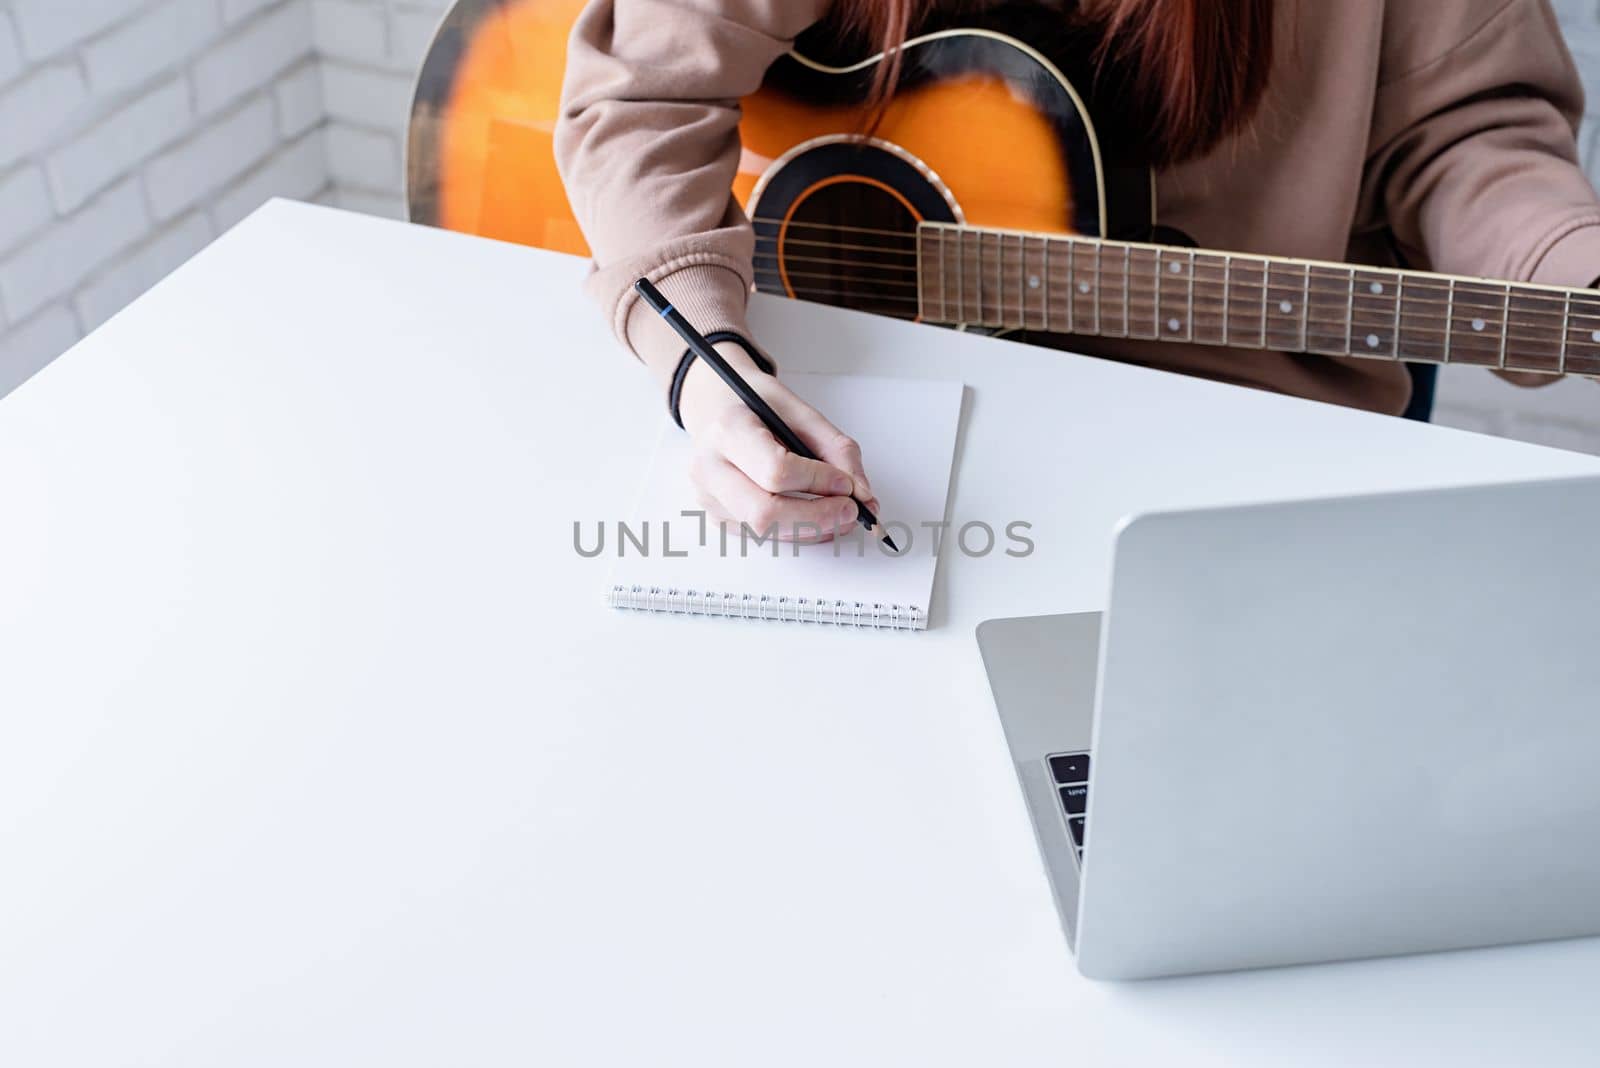 Young woman learning to play guitar at home by Desperada